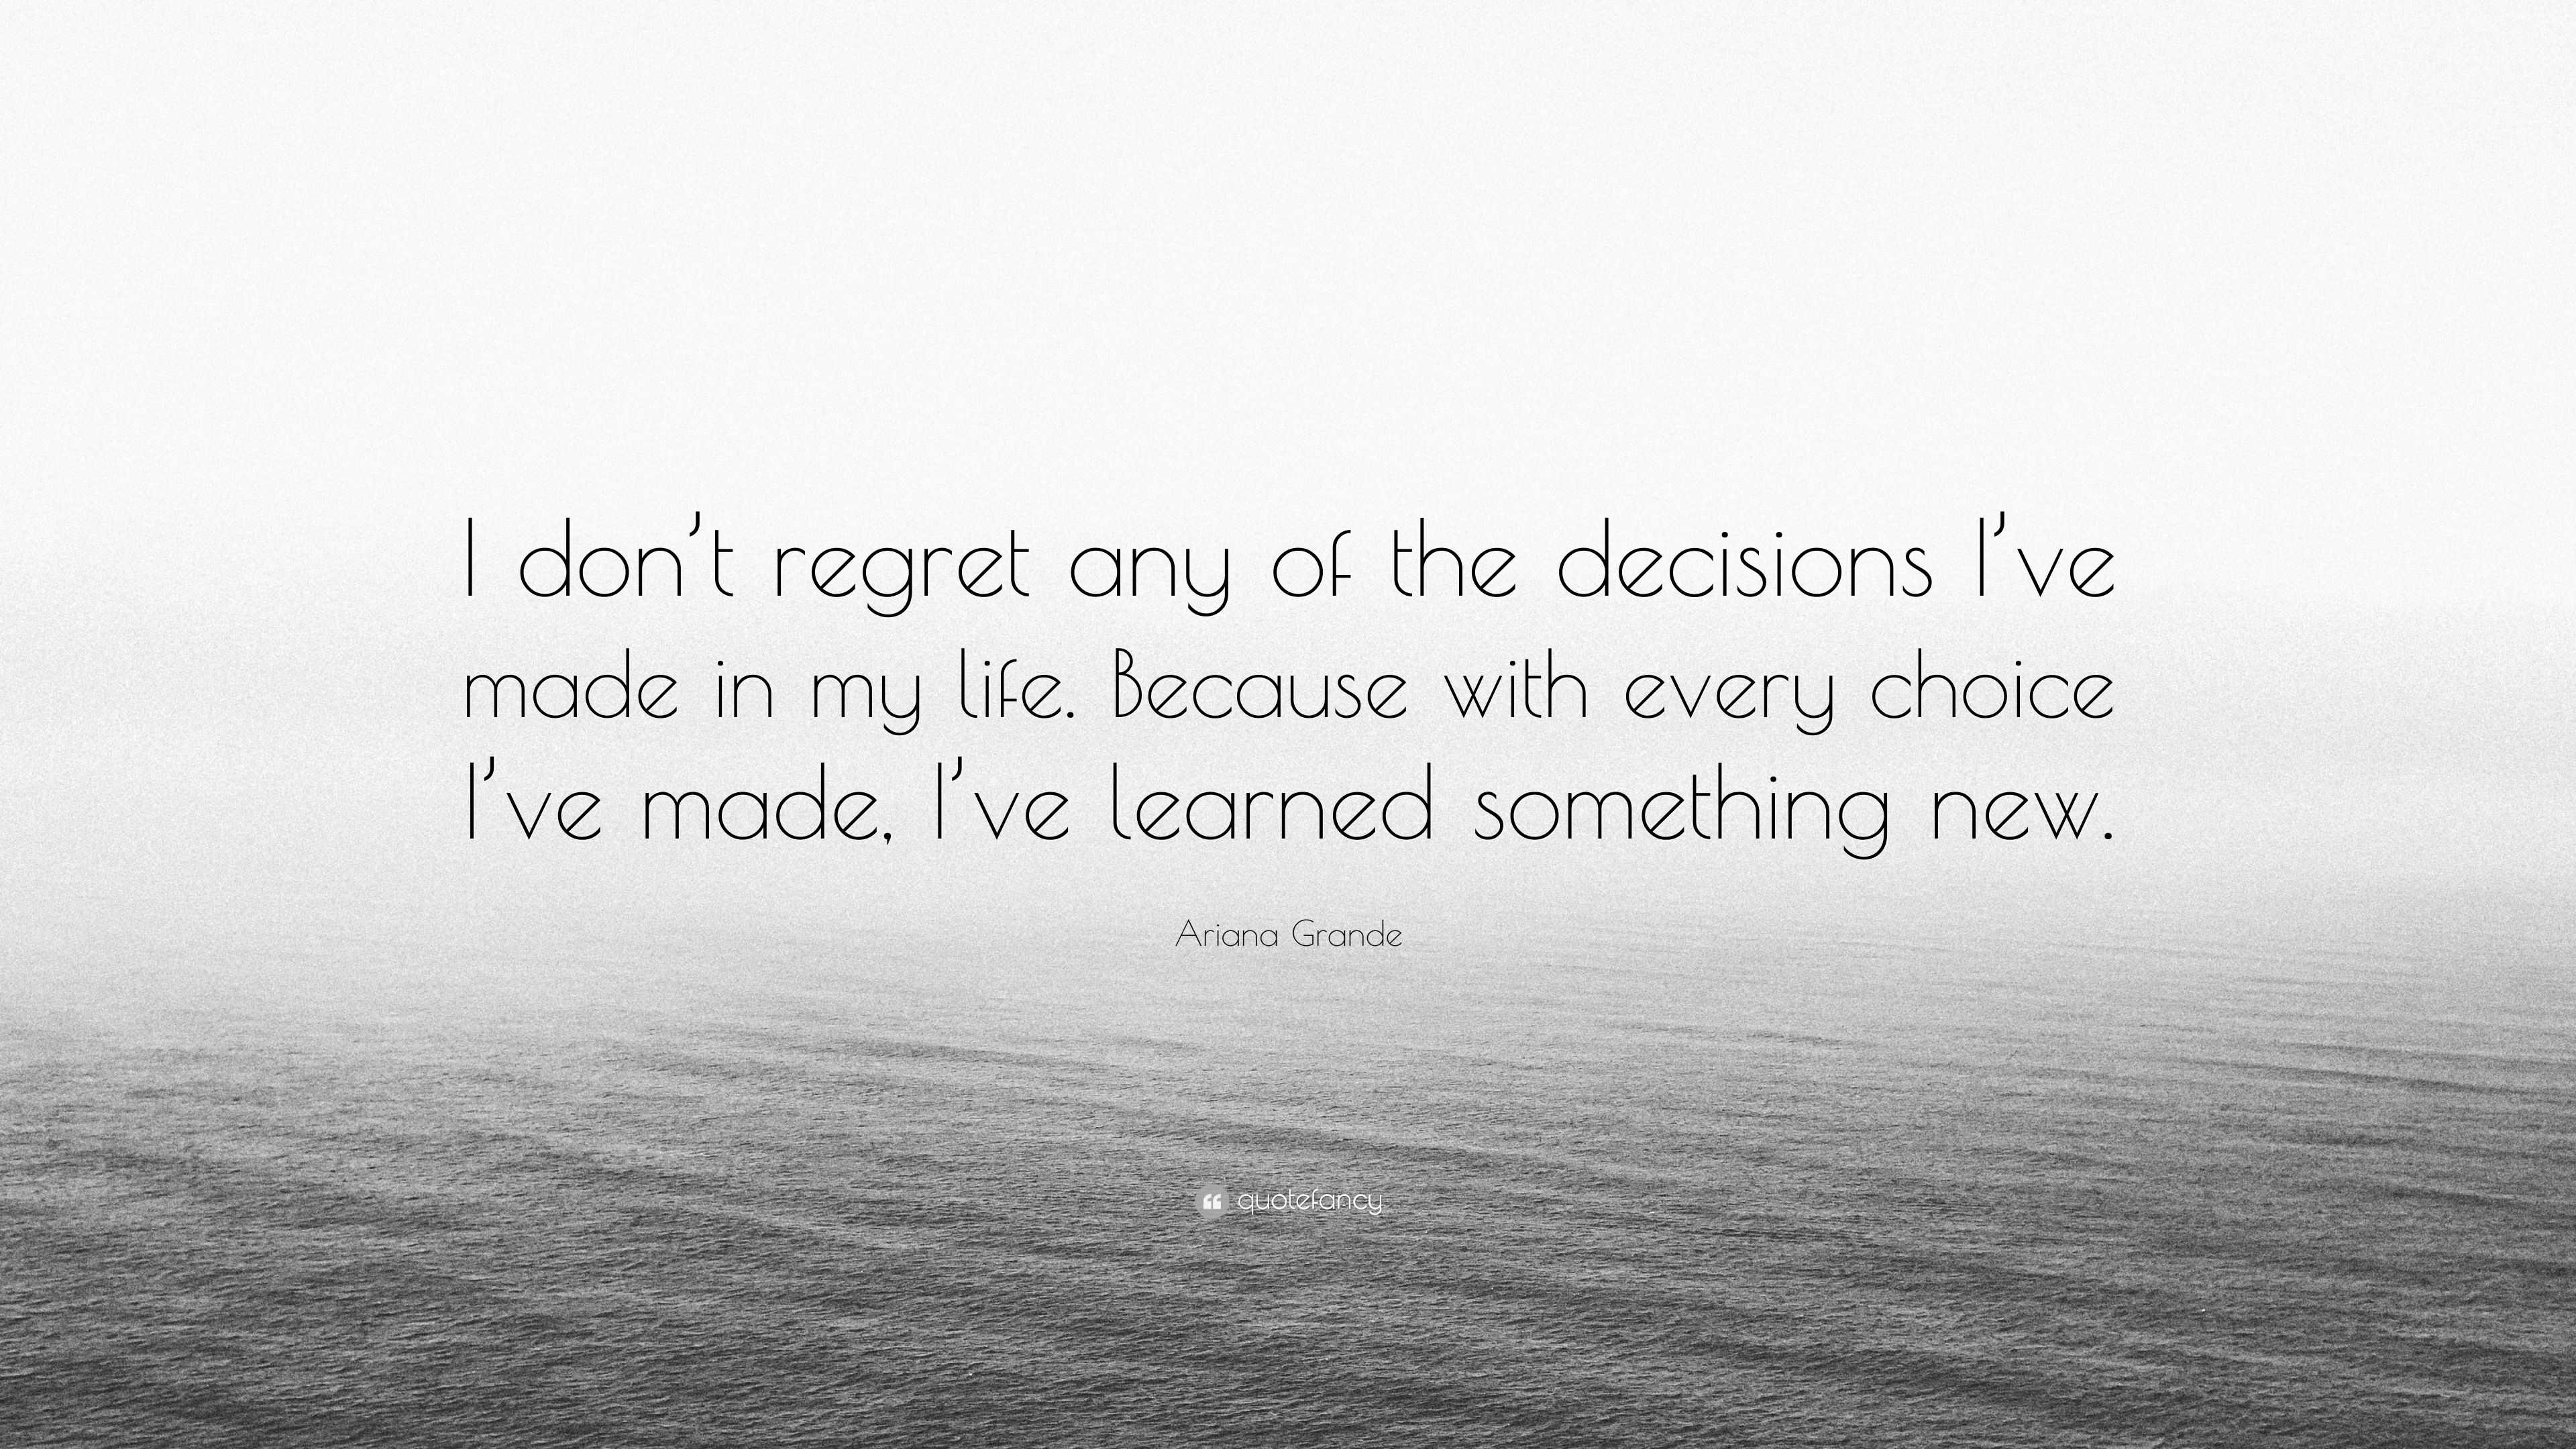 Ariana Grande Quote “I don’t regret any of the decisions